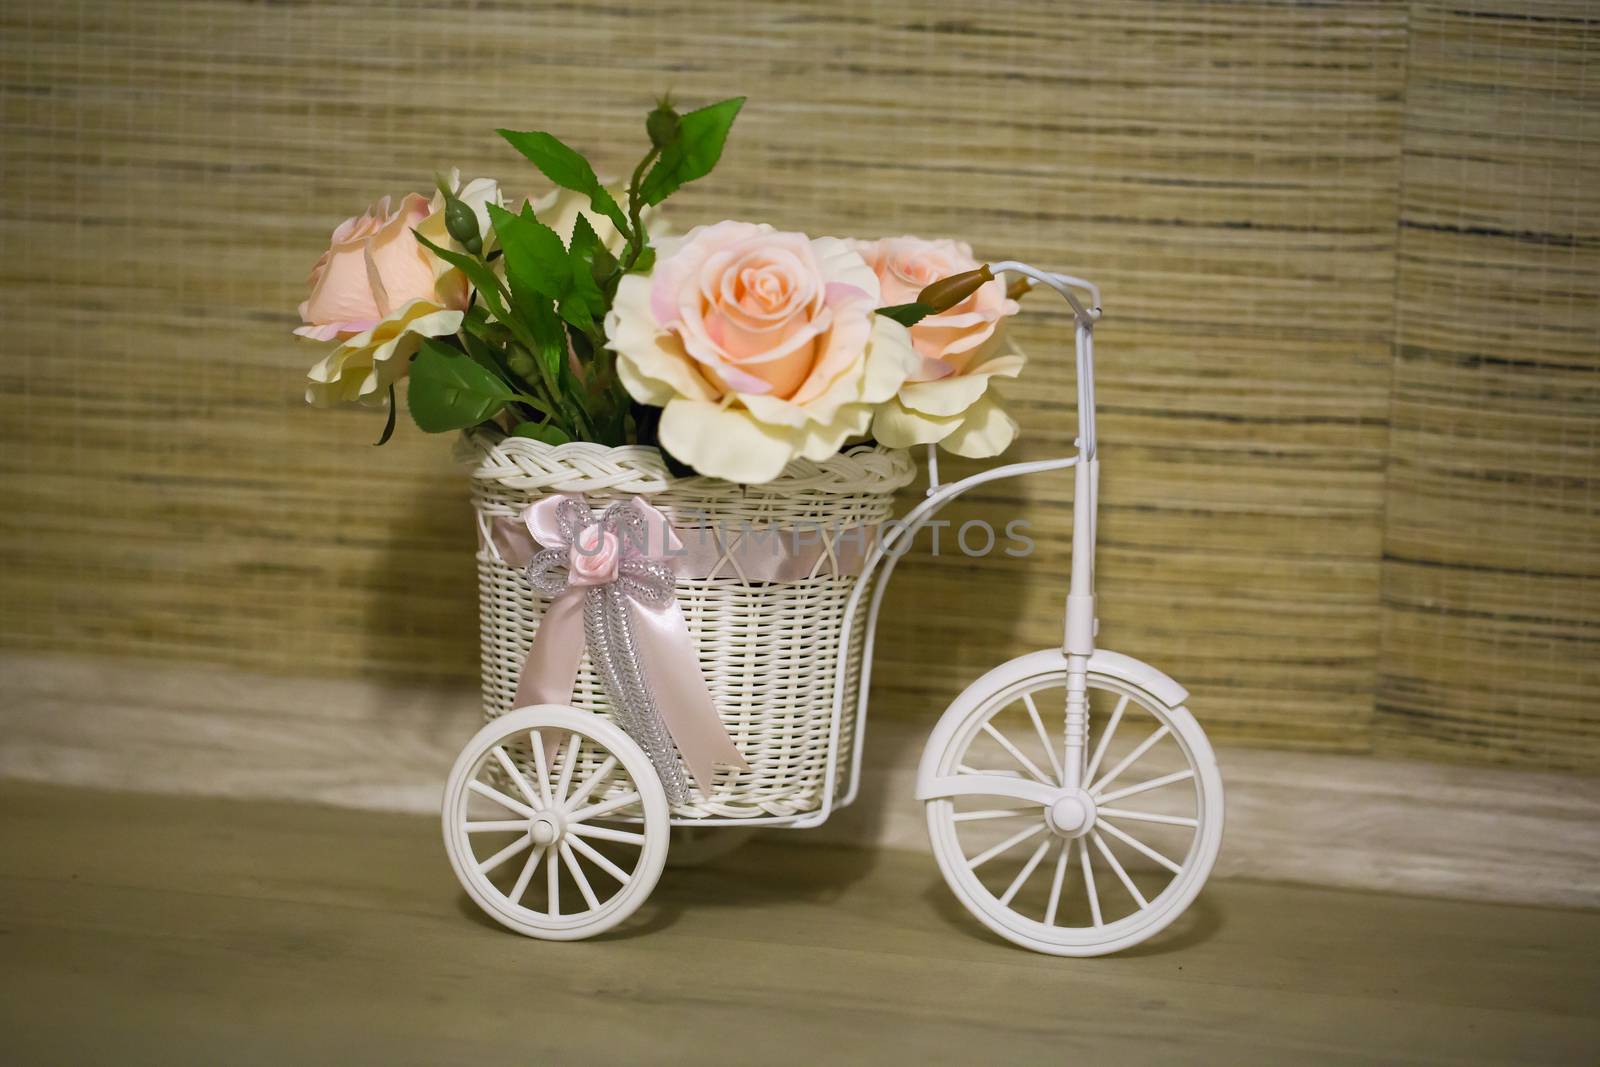 Roses on a mini tricycle.